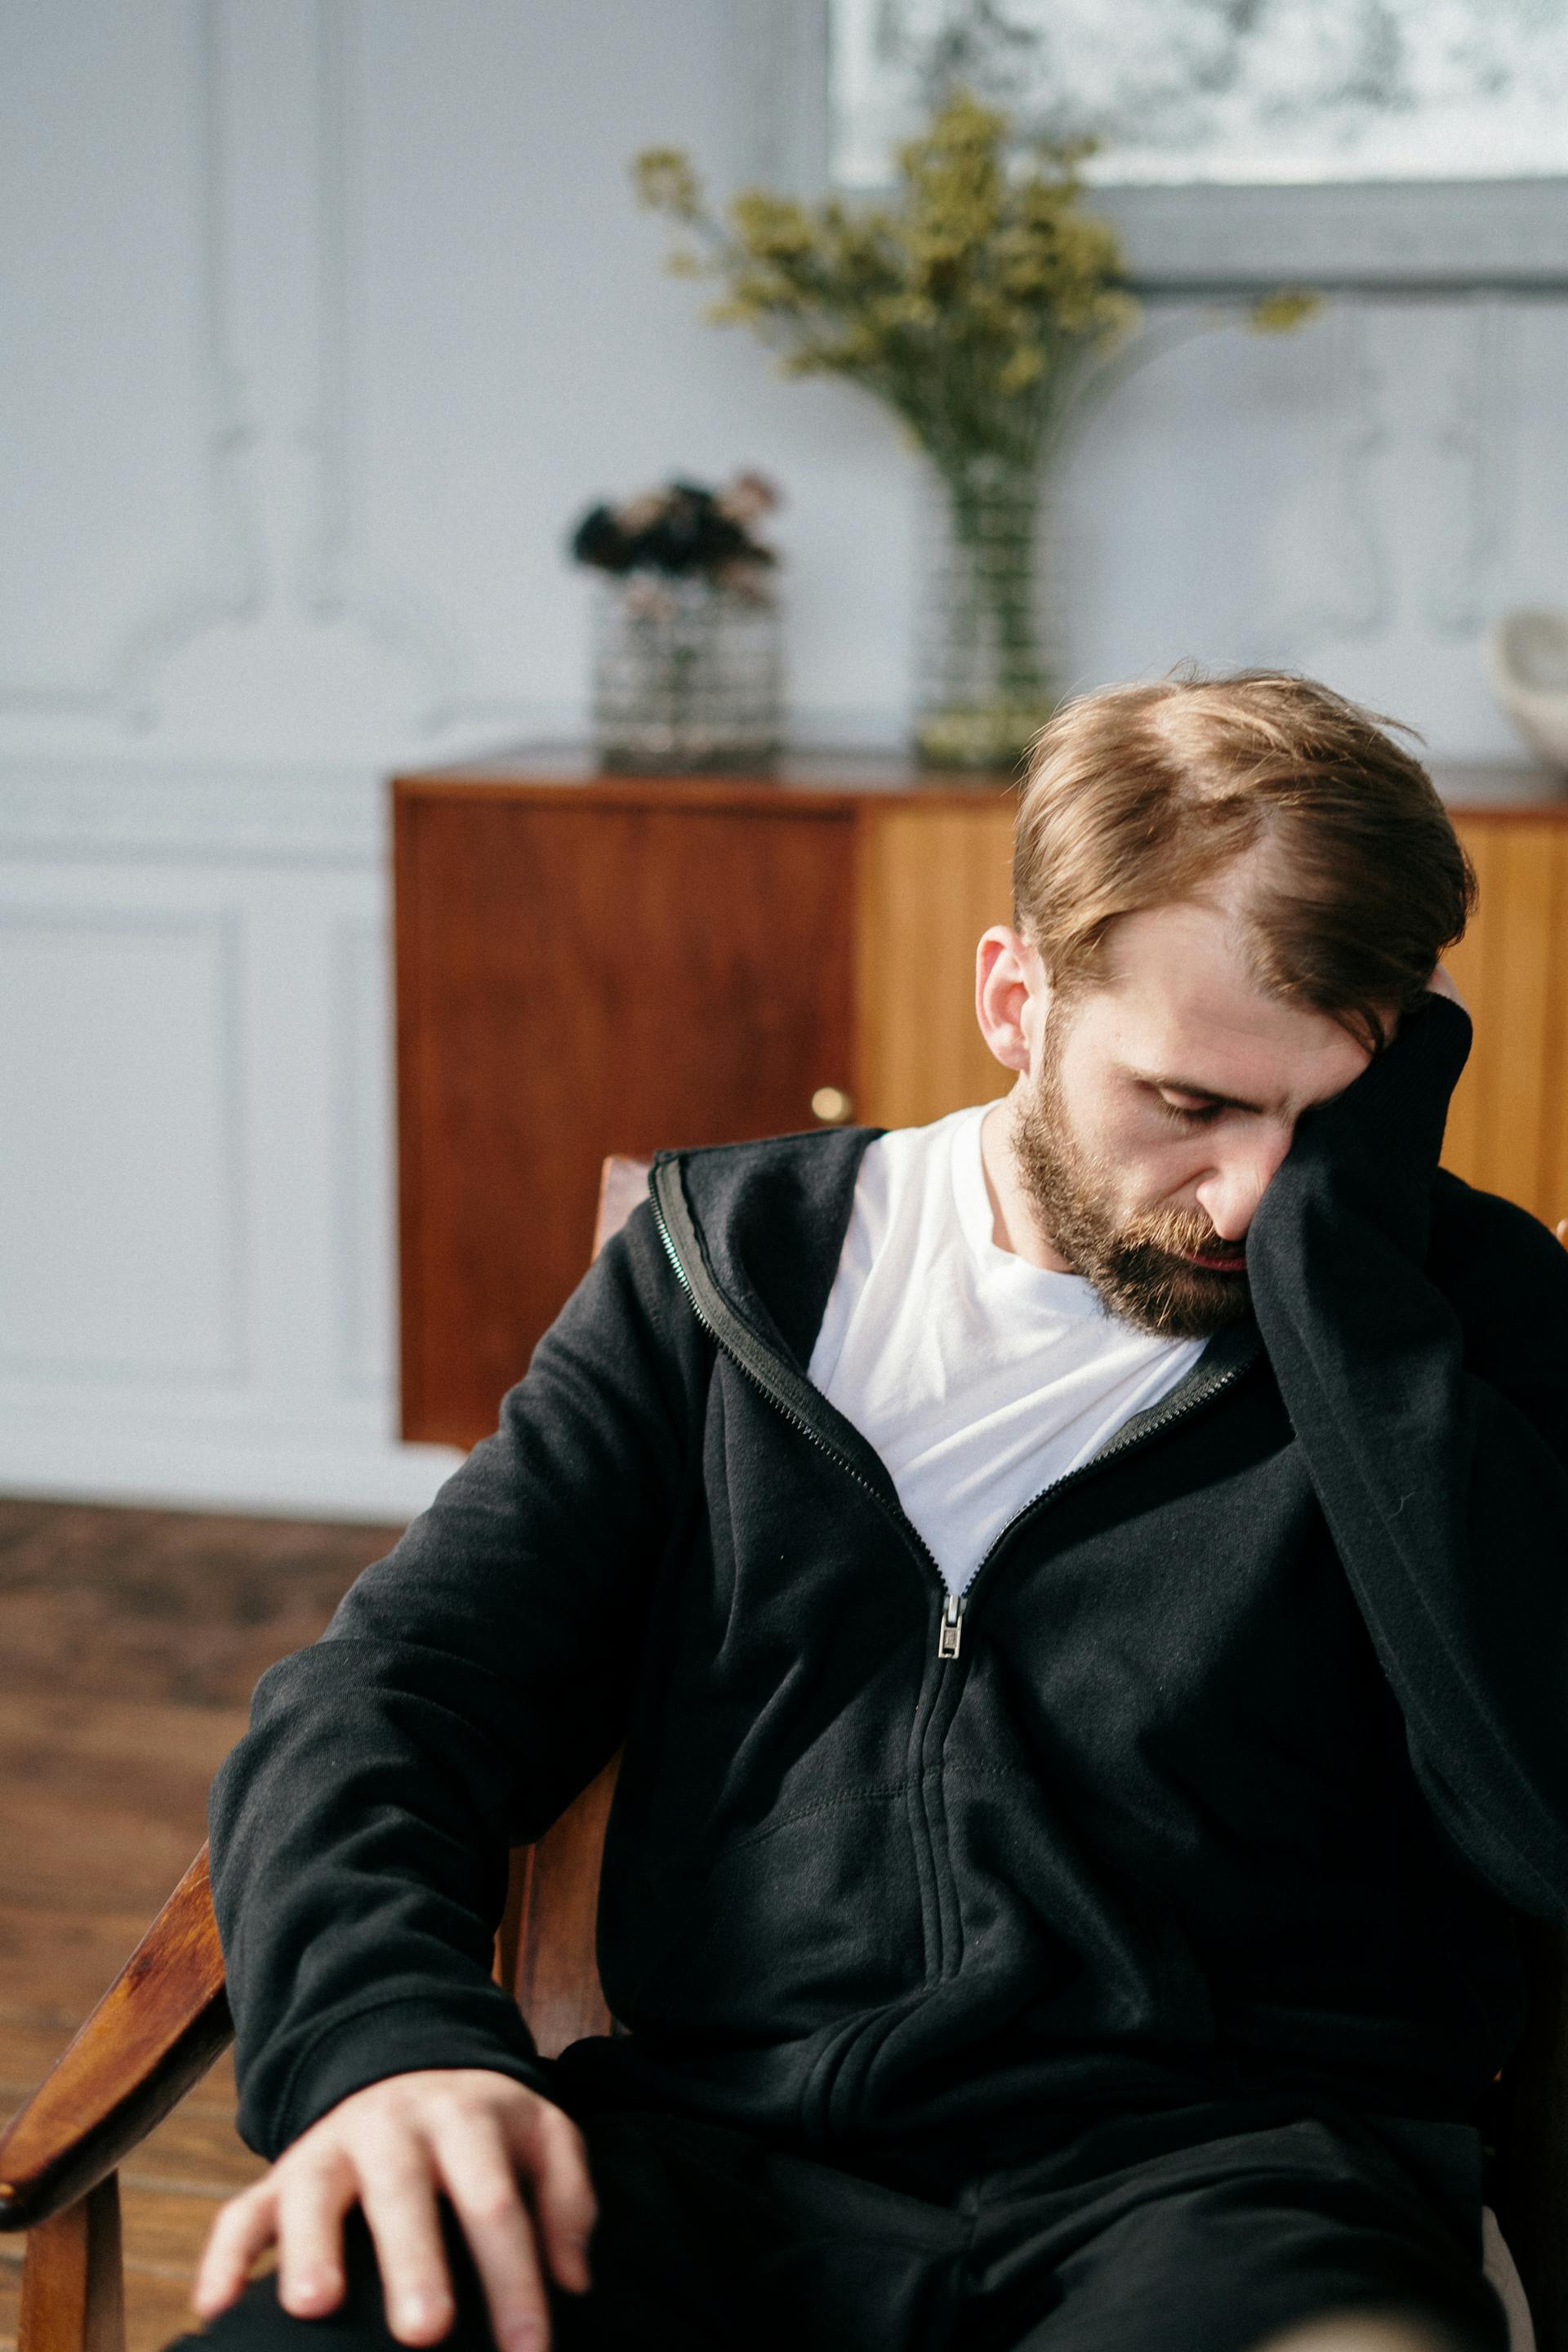 A man sitting on a chair | Source: Pexels